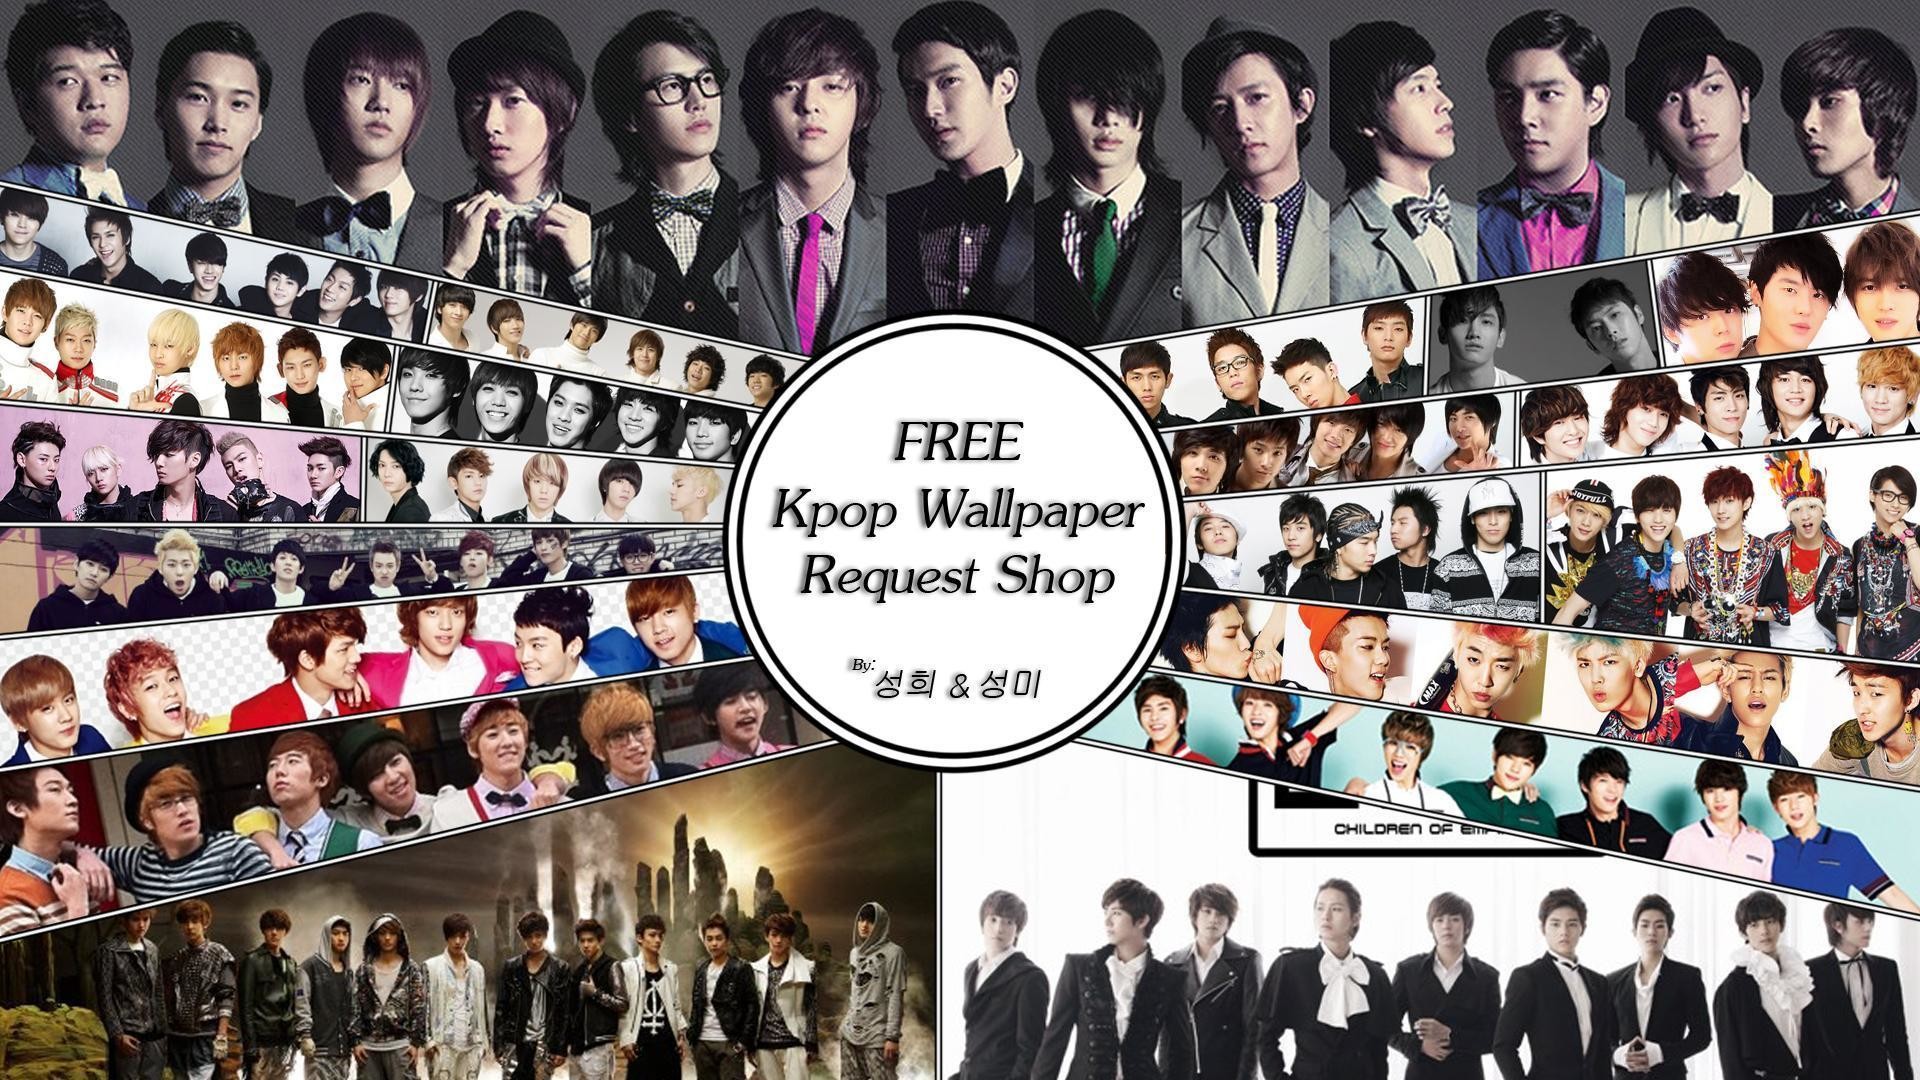 kpop wallpaper,social group,collage,art,event,photography